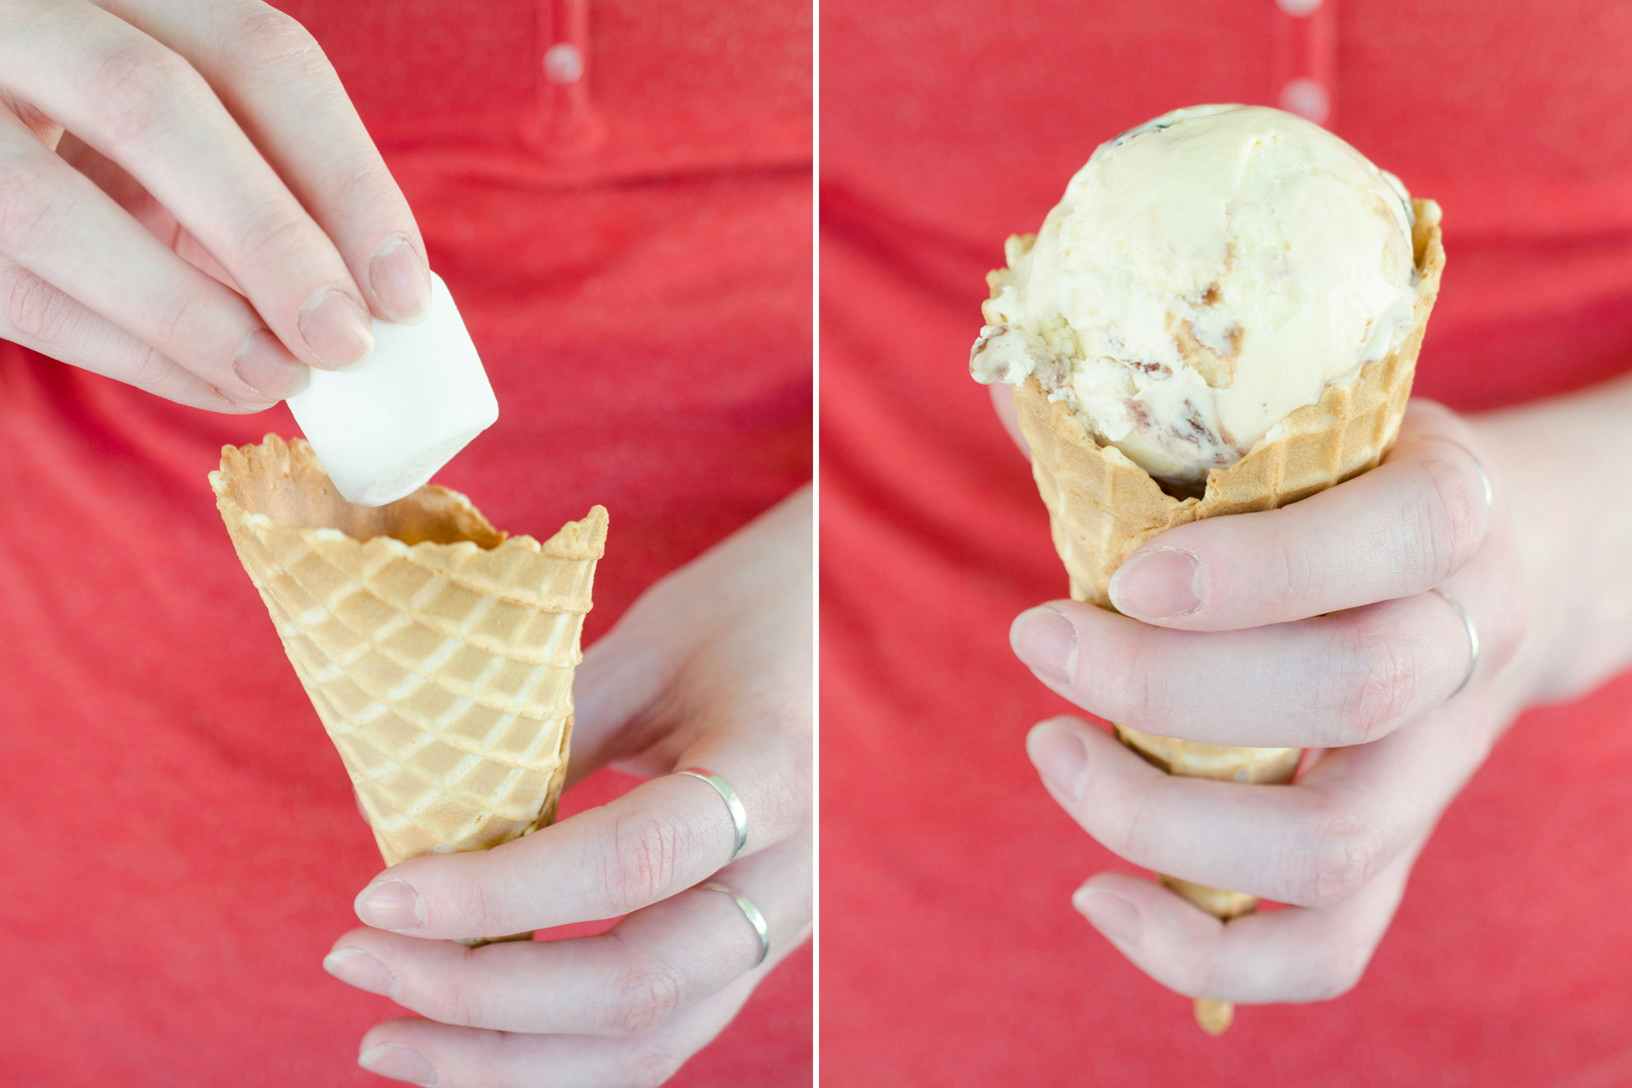 Person placing a marshmallow in a waffle cone to stop ice cream from leaking.